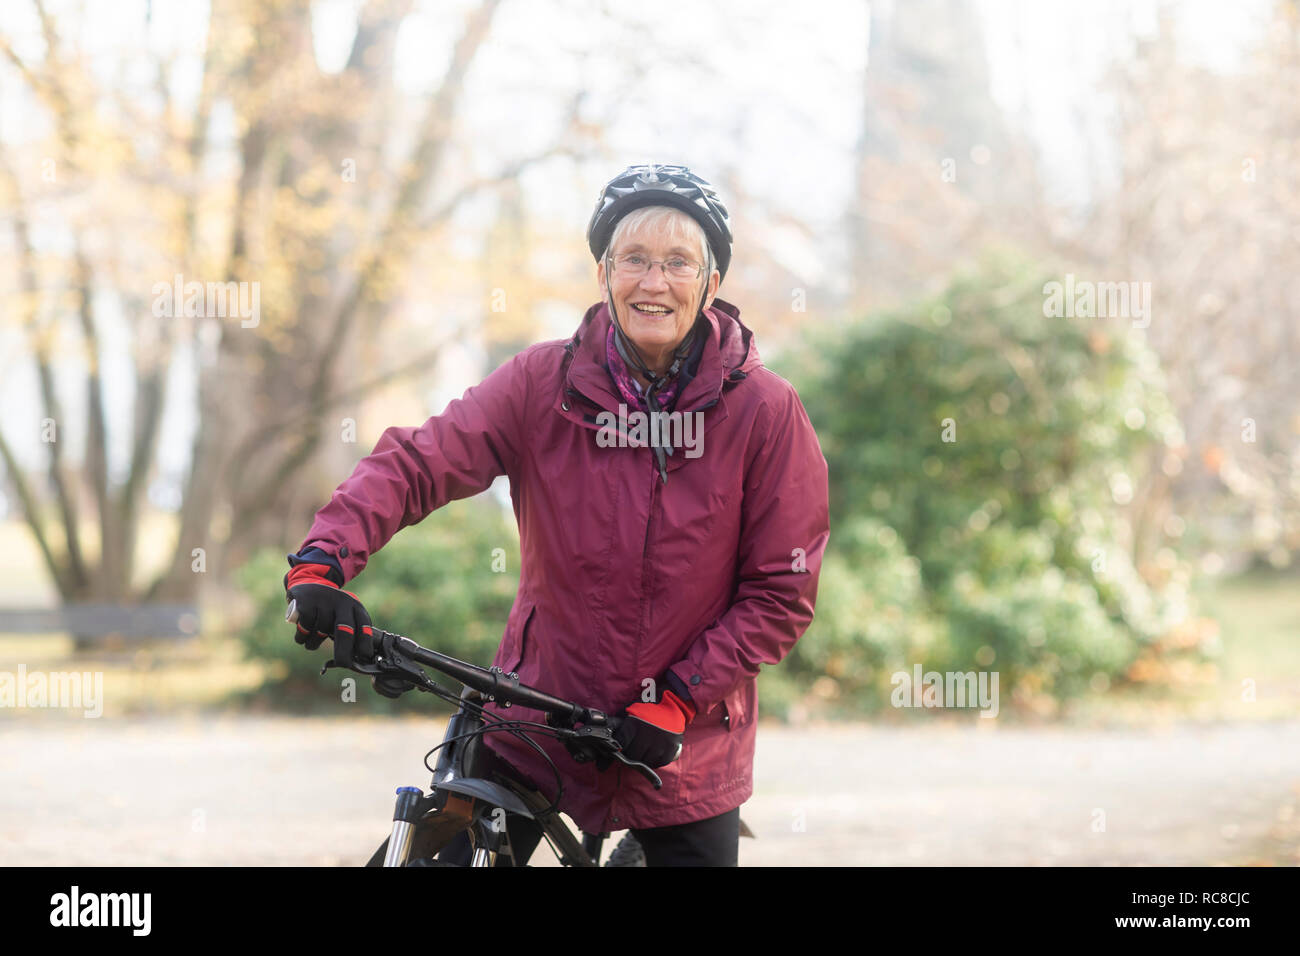 Senior woman on bicycle in park Stock Photo